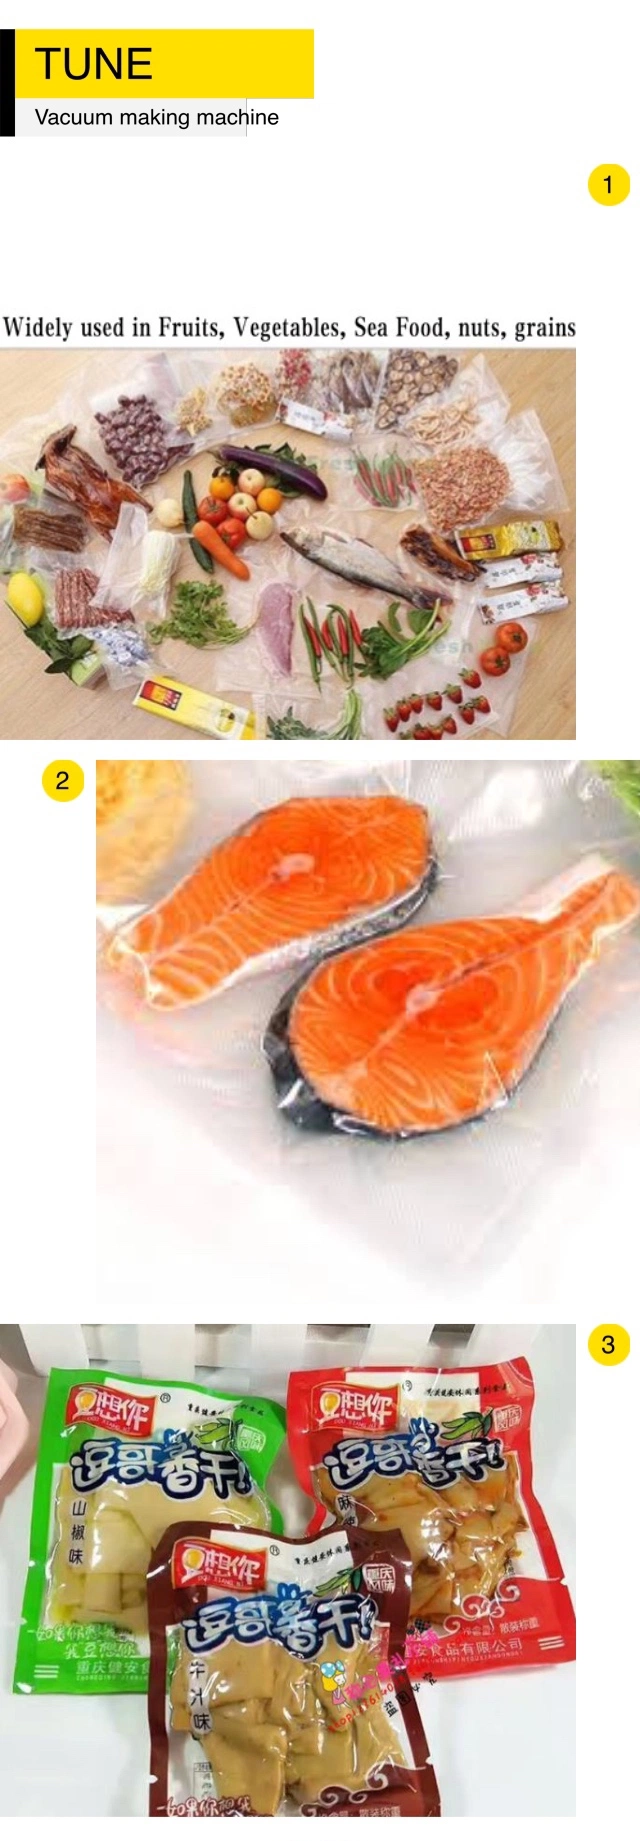 Meat Vacuum Packing Machine Top Table